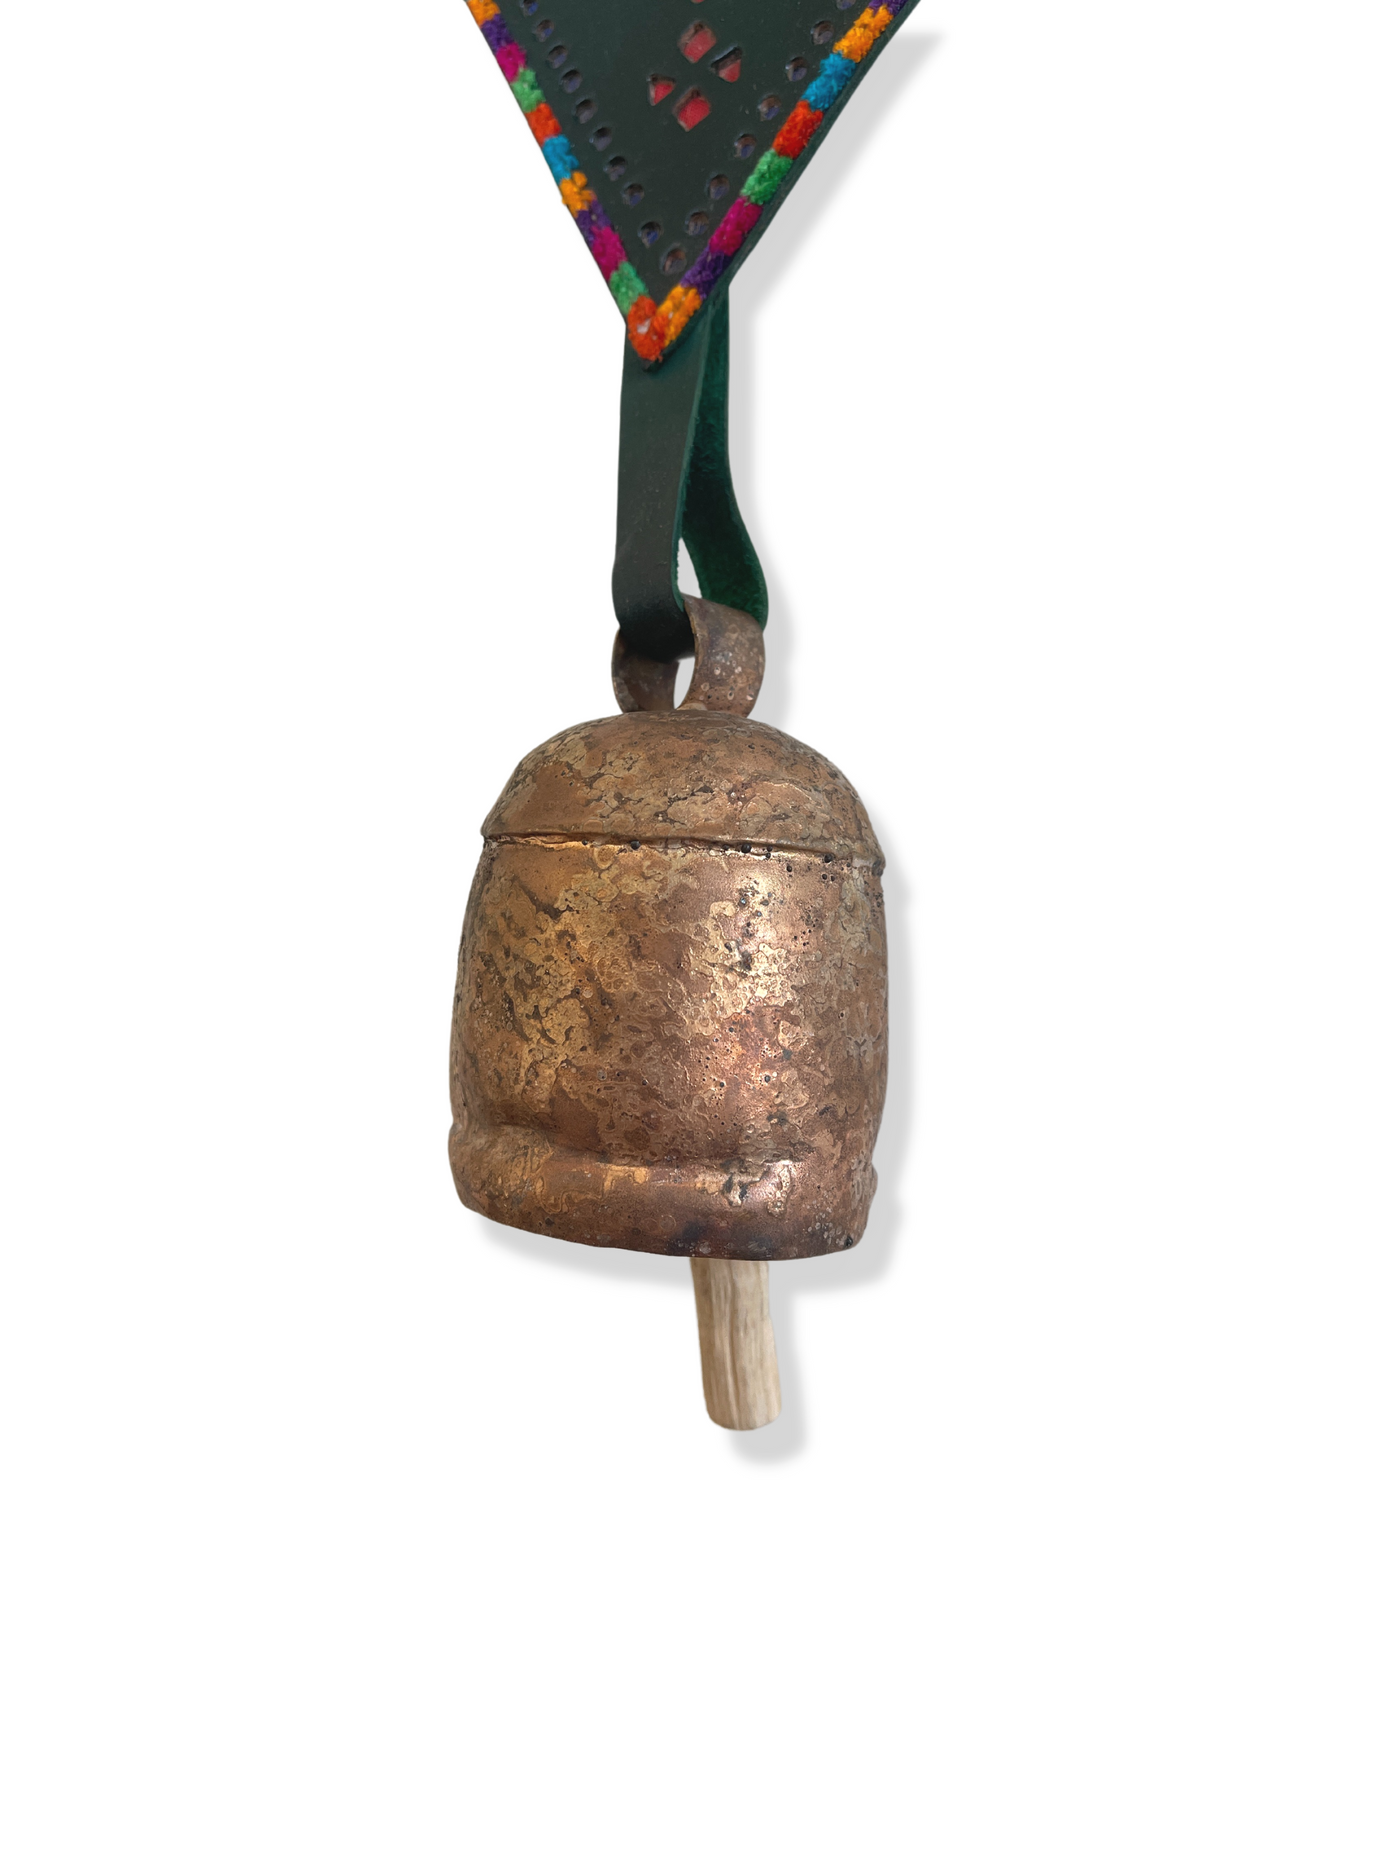 4" Copper Bell with Leather Hanger